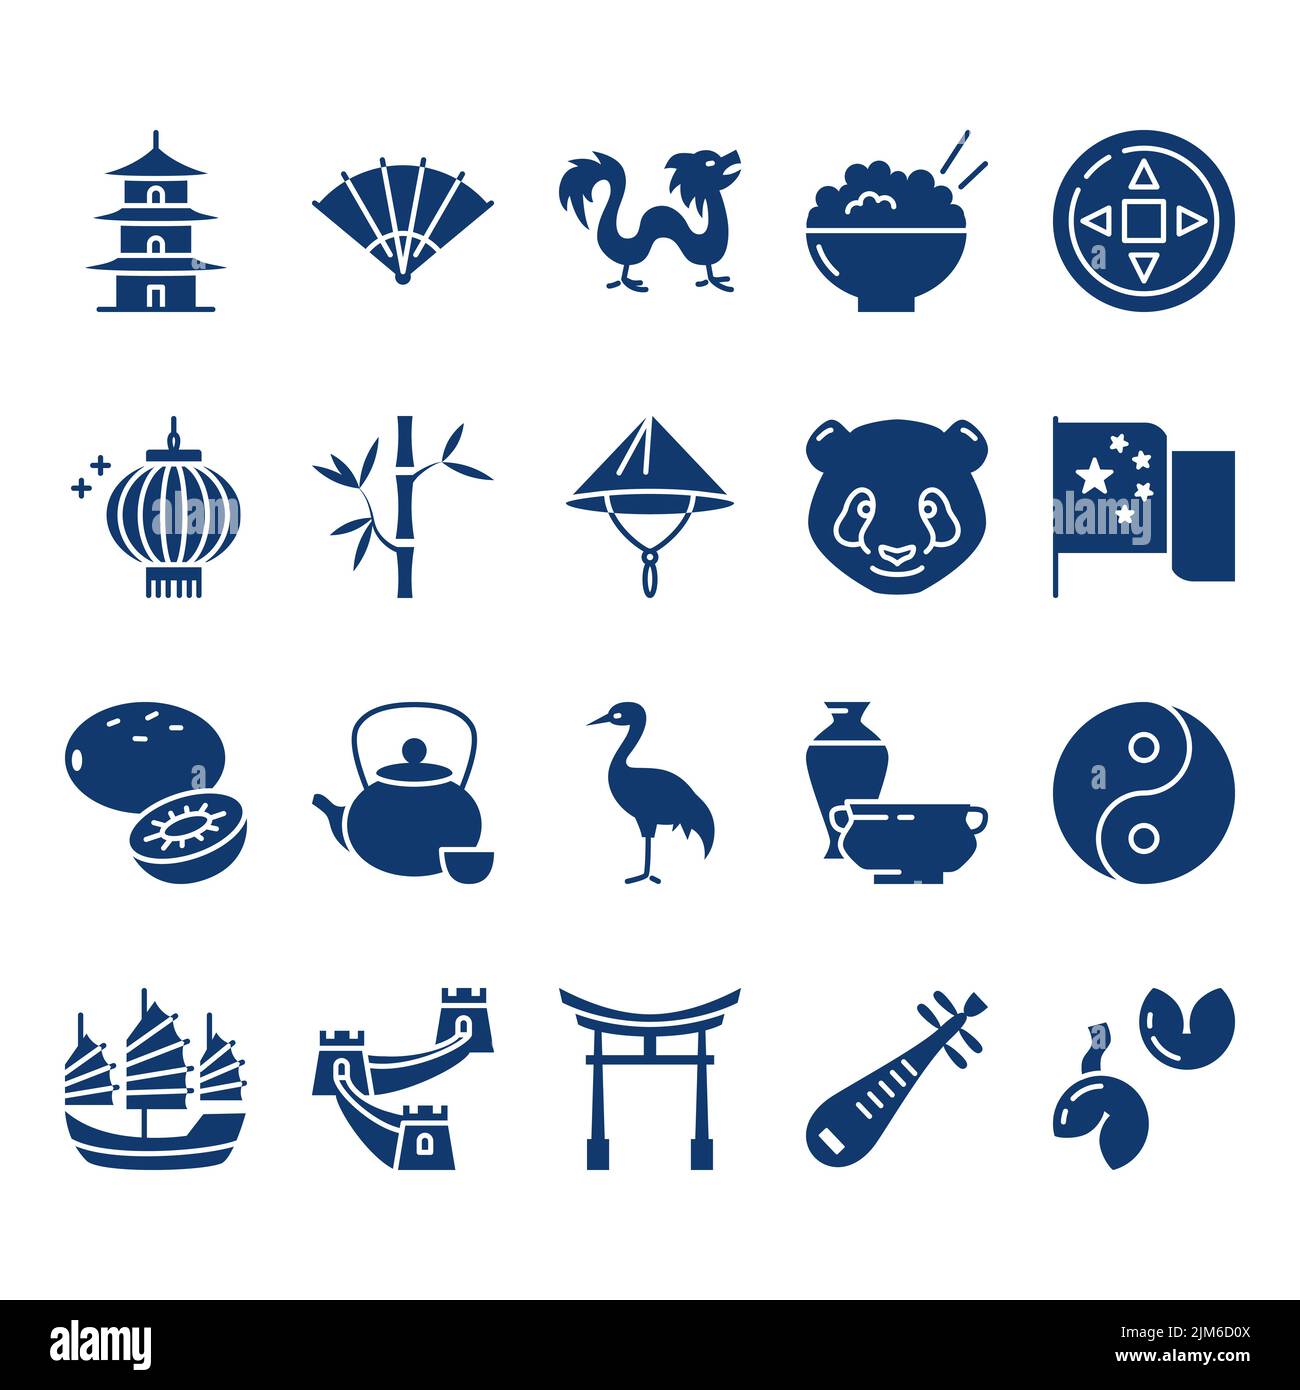 China icon set in flat style. Chinese national symbols. Vector illustration. Stock Vector